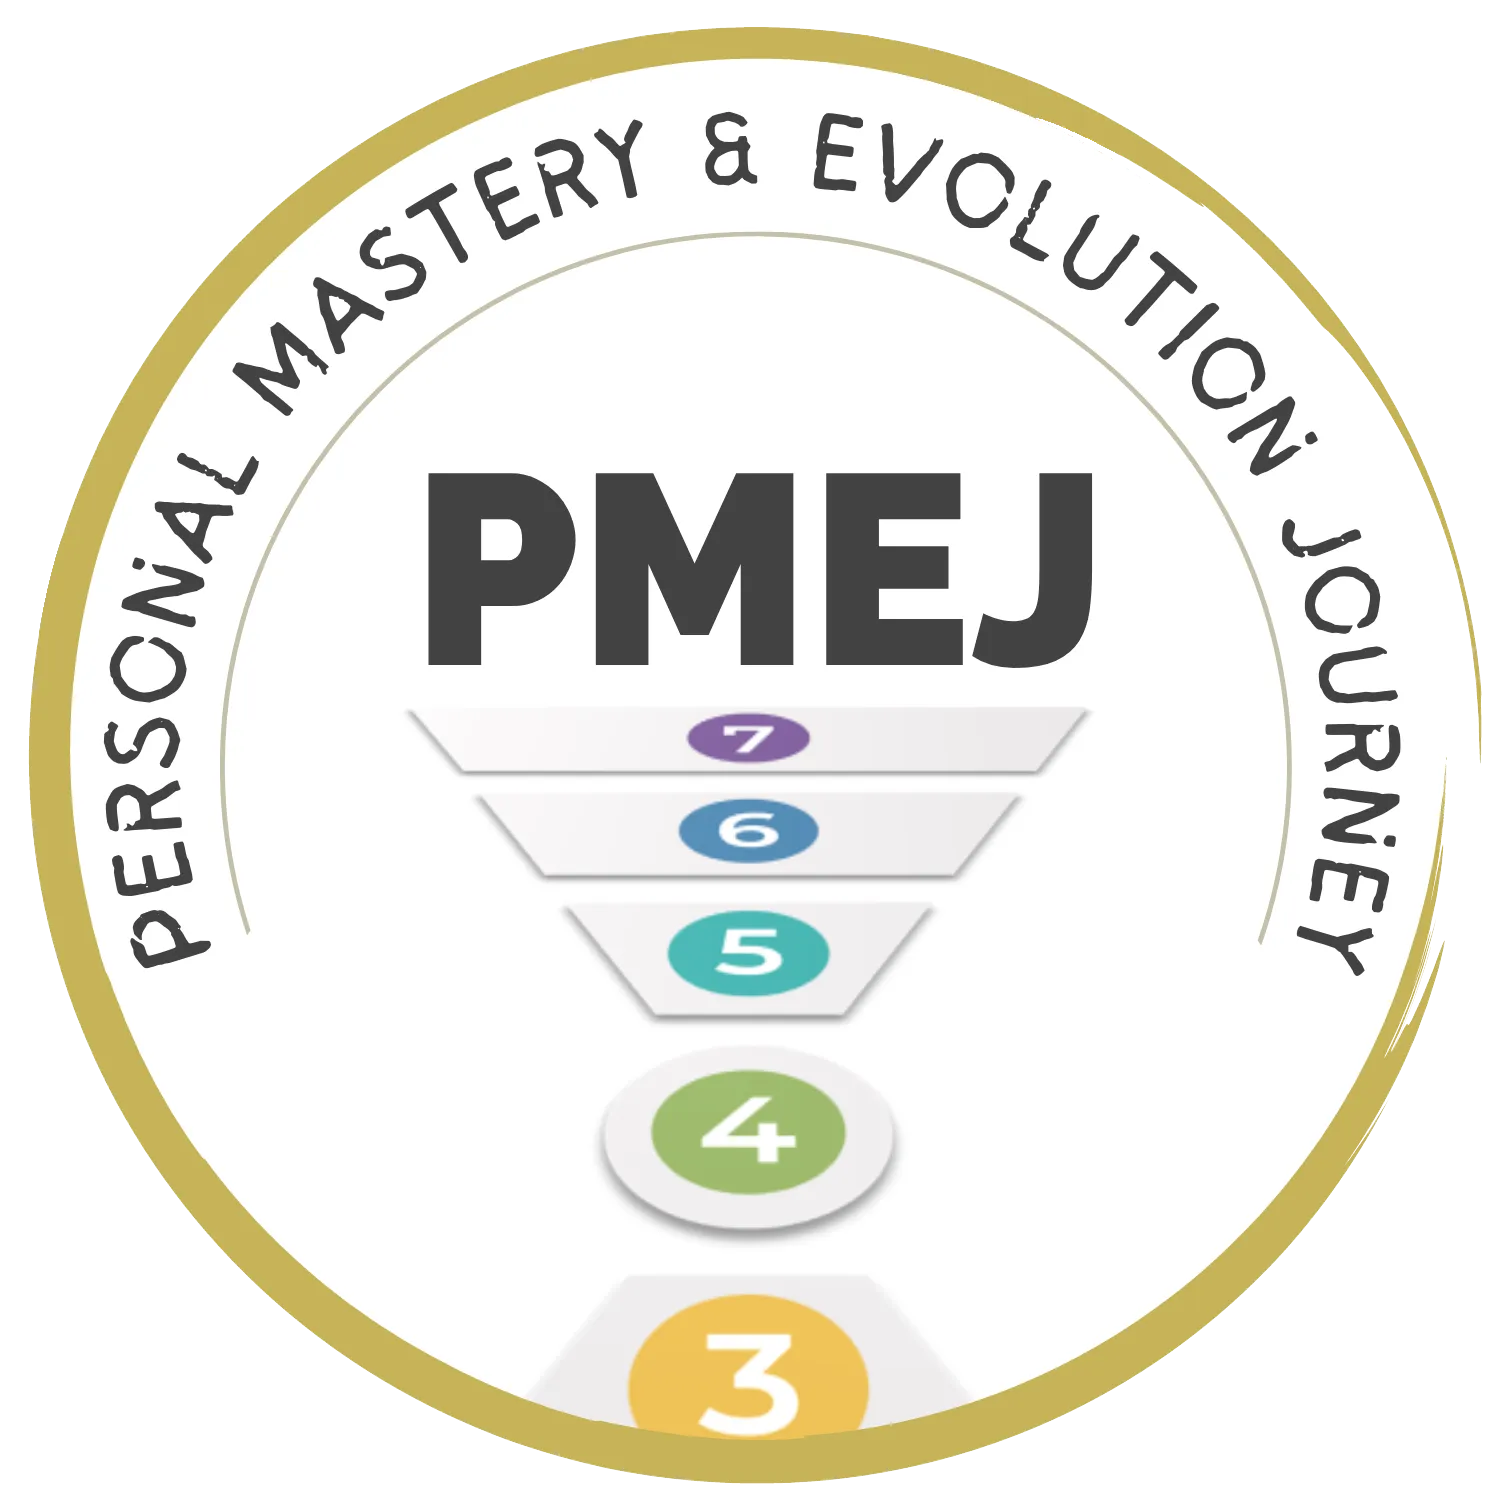 Personal Mastery & Evolution Journey